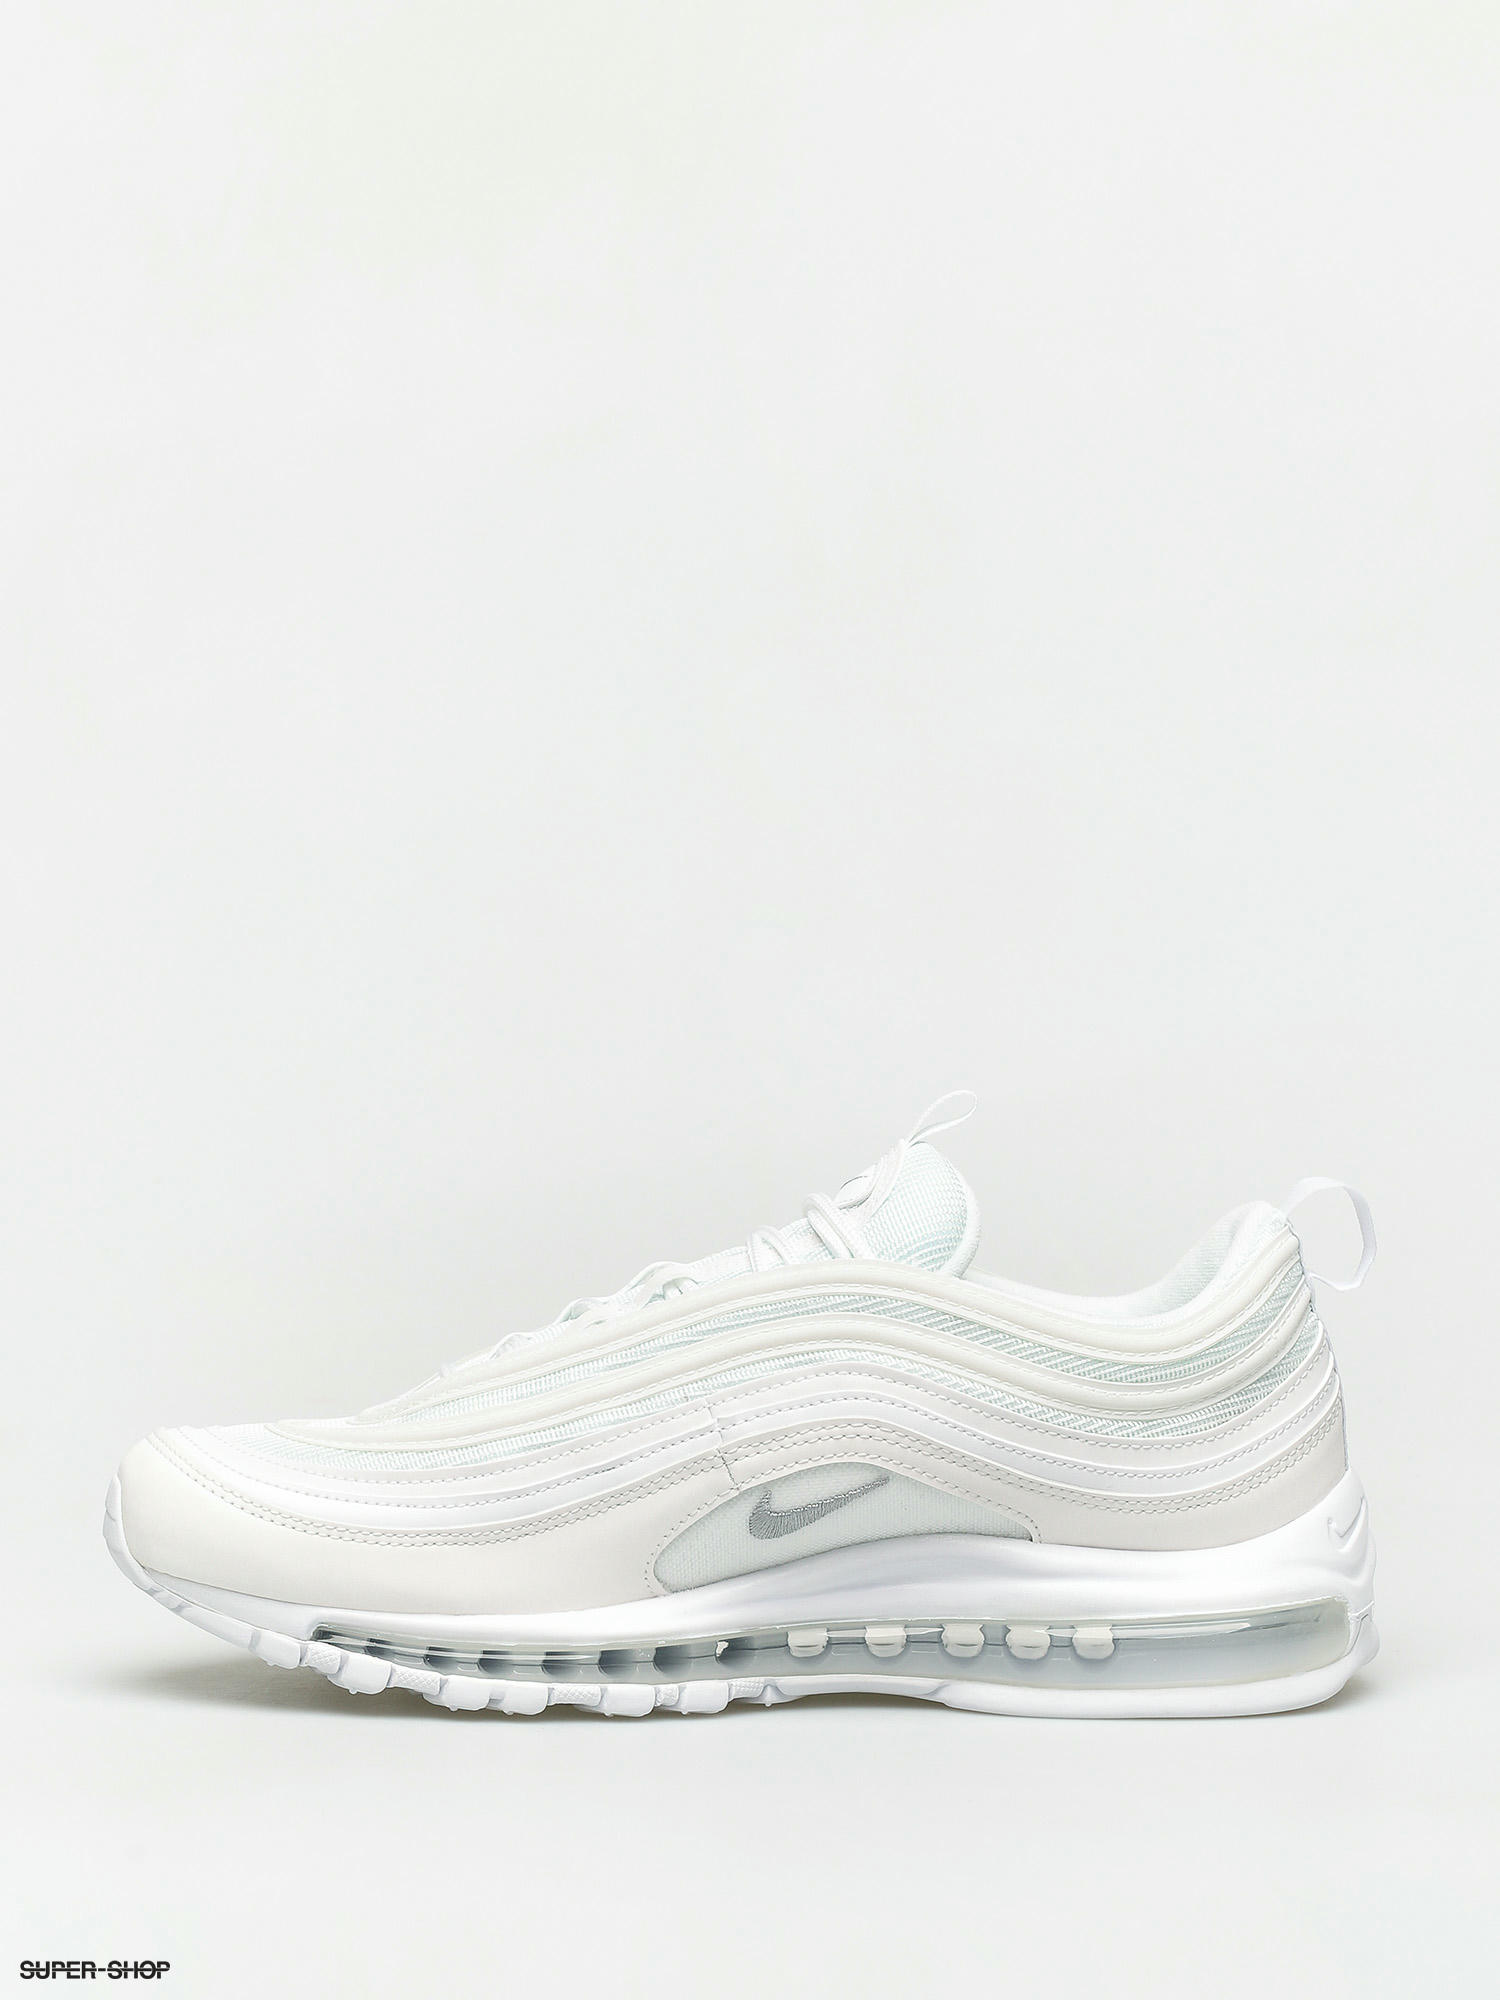 white and wolf grey 97